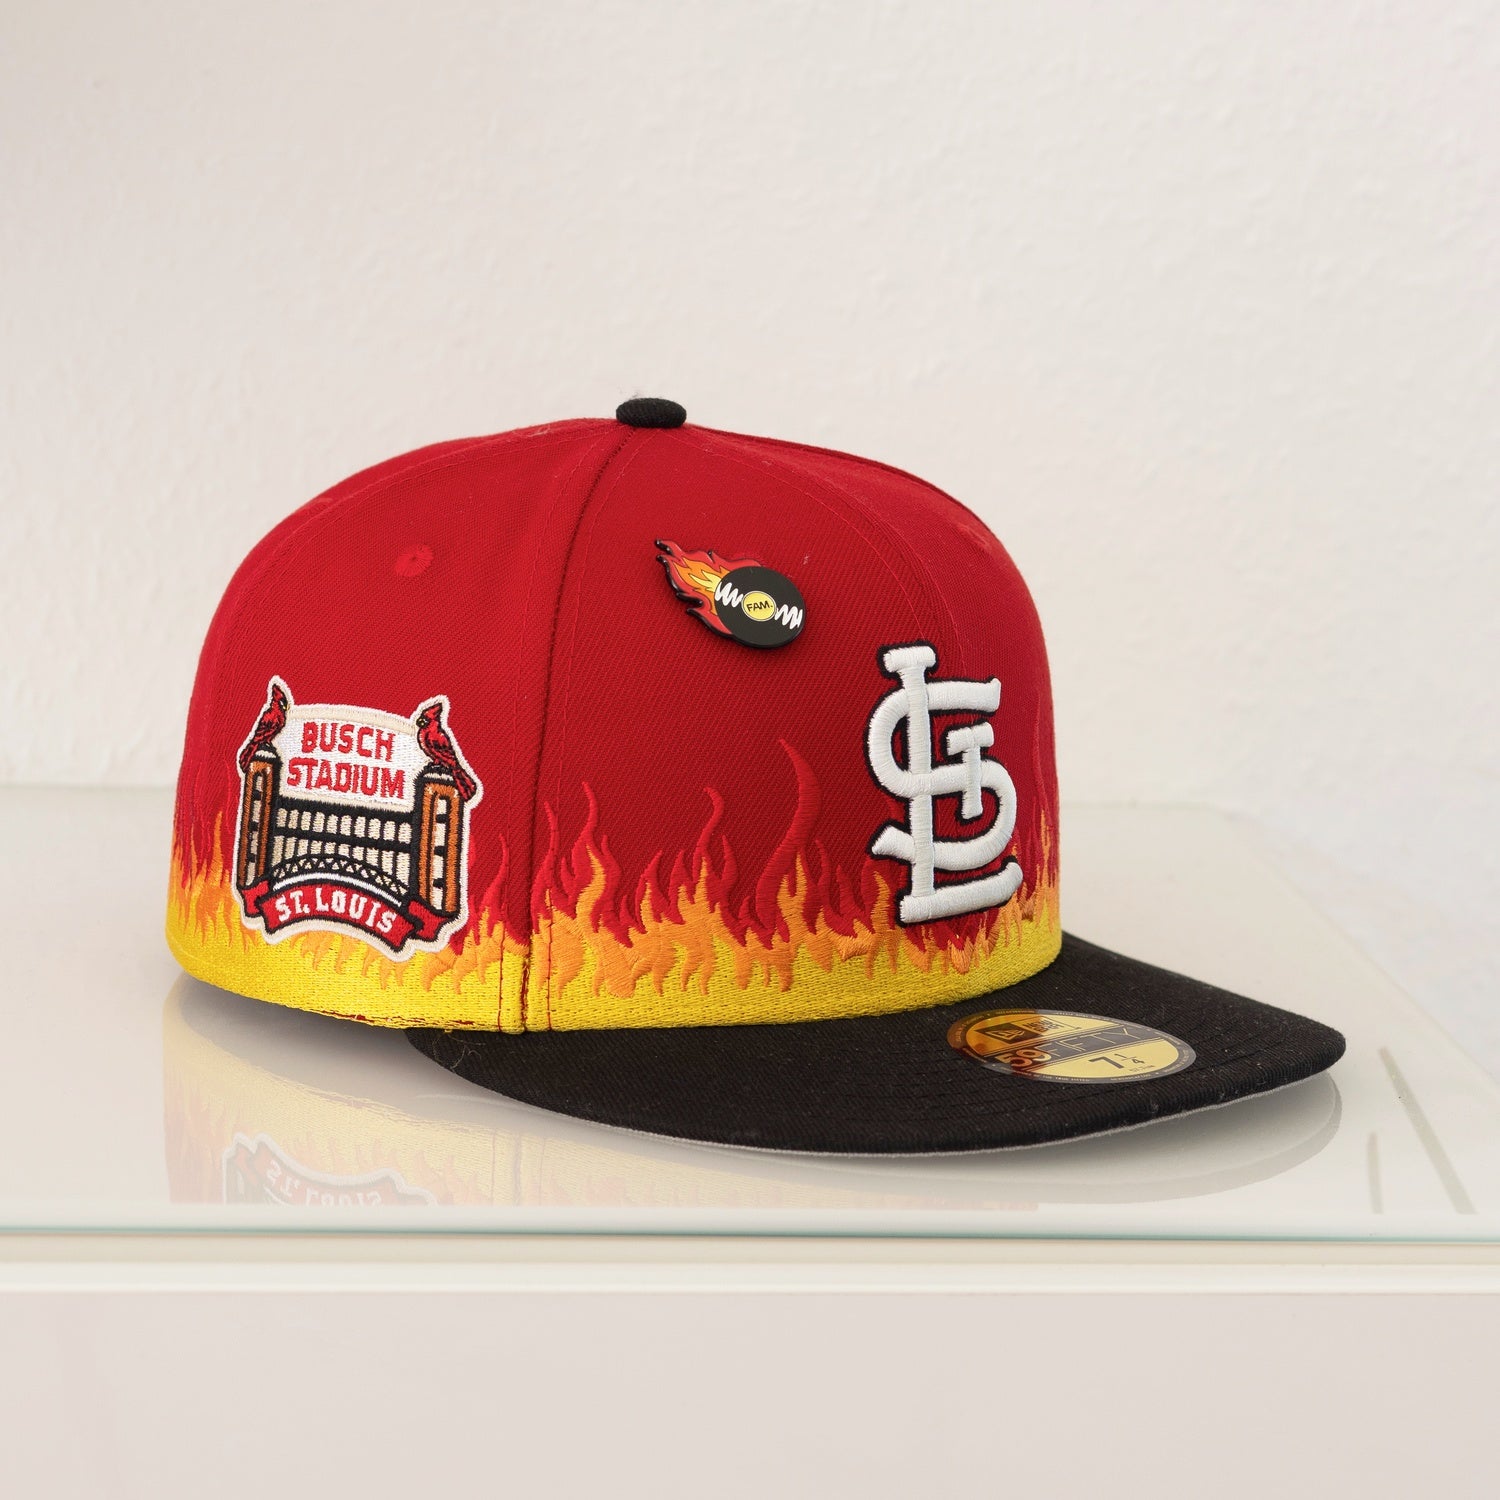 NEW ERA 59FIFTY MLB SAINT LOUIS CARDINALS BUCH STADIUM FLAME TWO TONE / GREY UV FITTED CAP